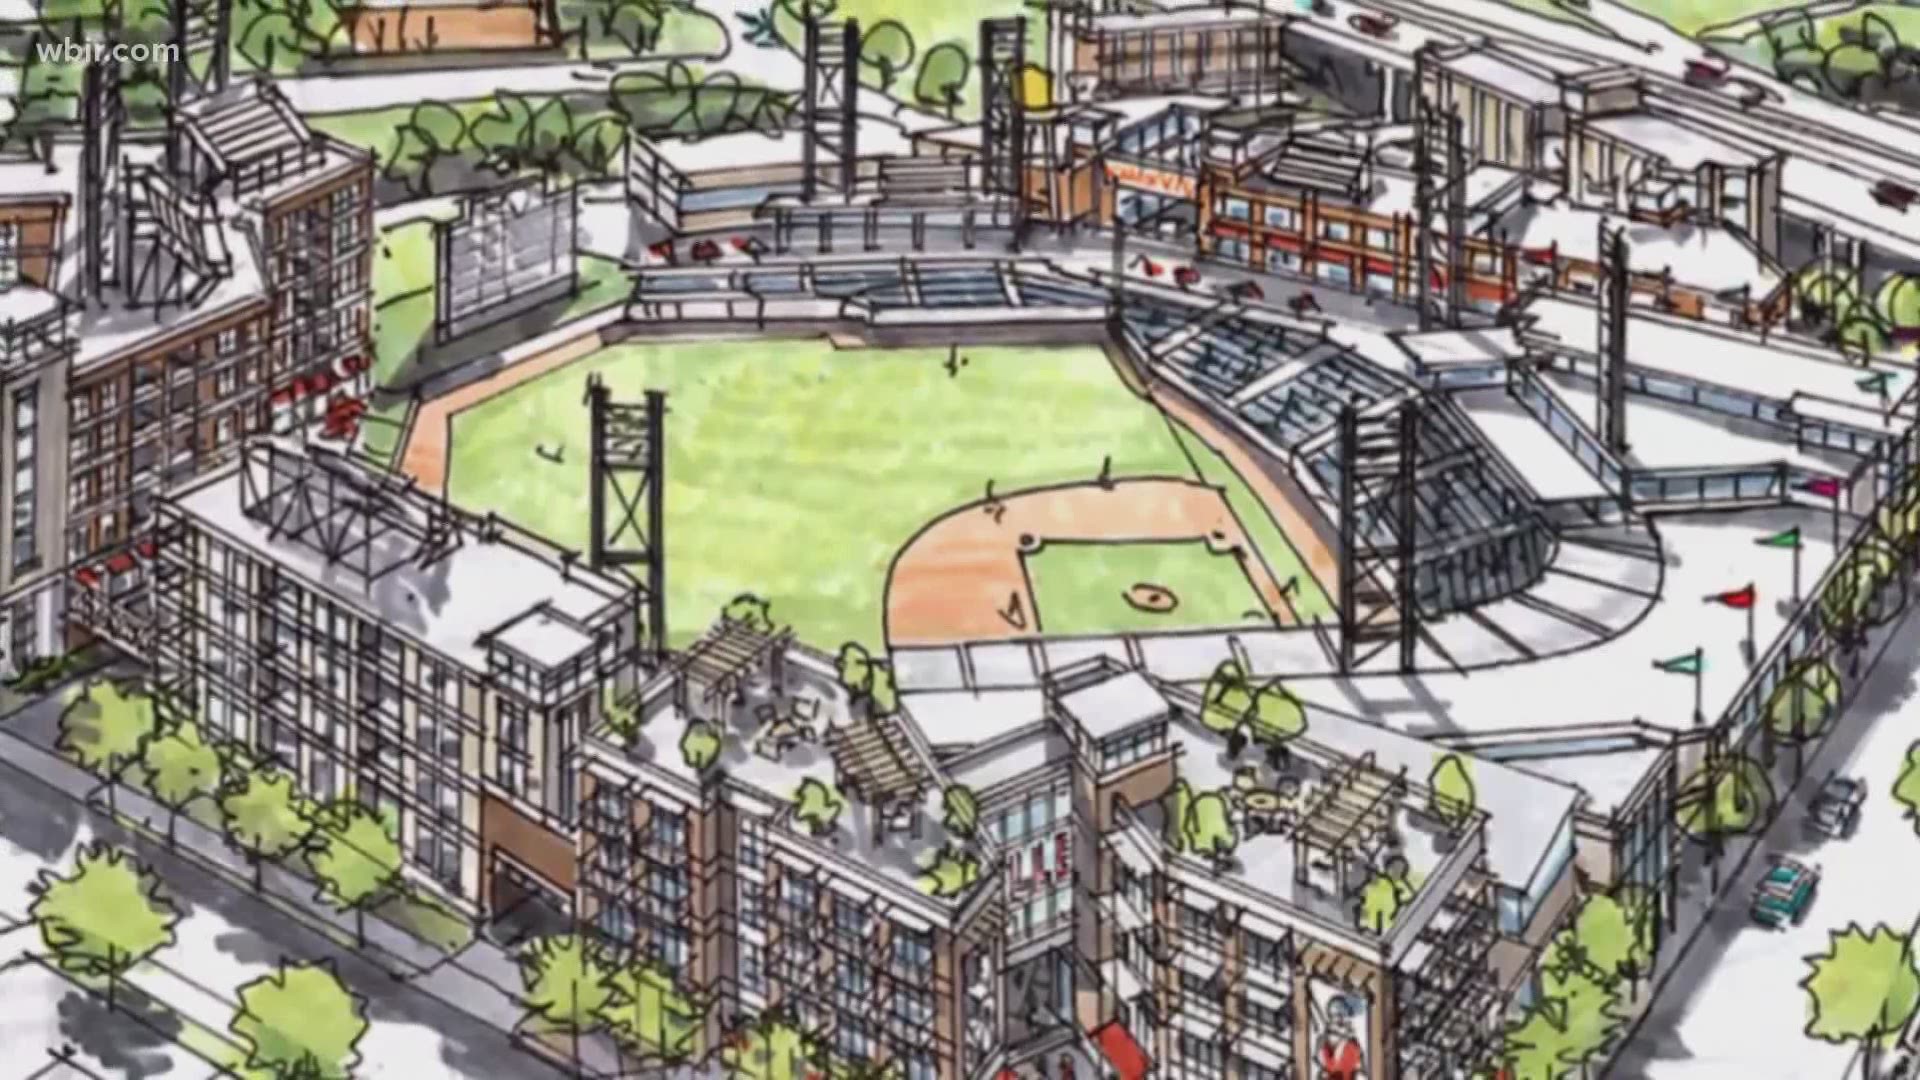 A professional soccer team heading to Knoxville is showing interest in playing inside a new stadium downtown.